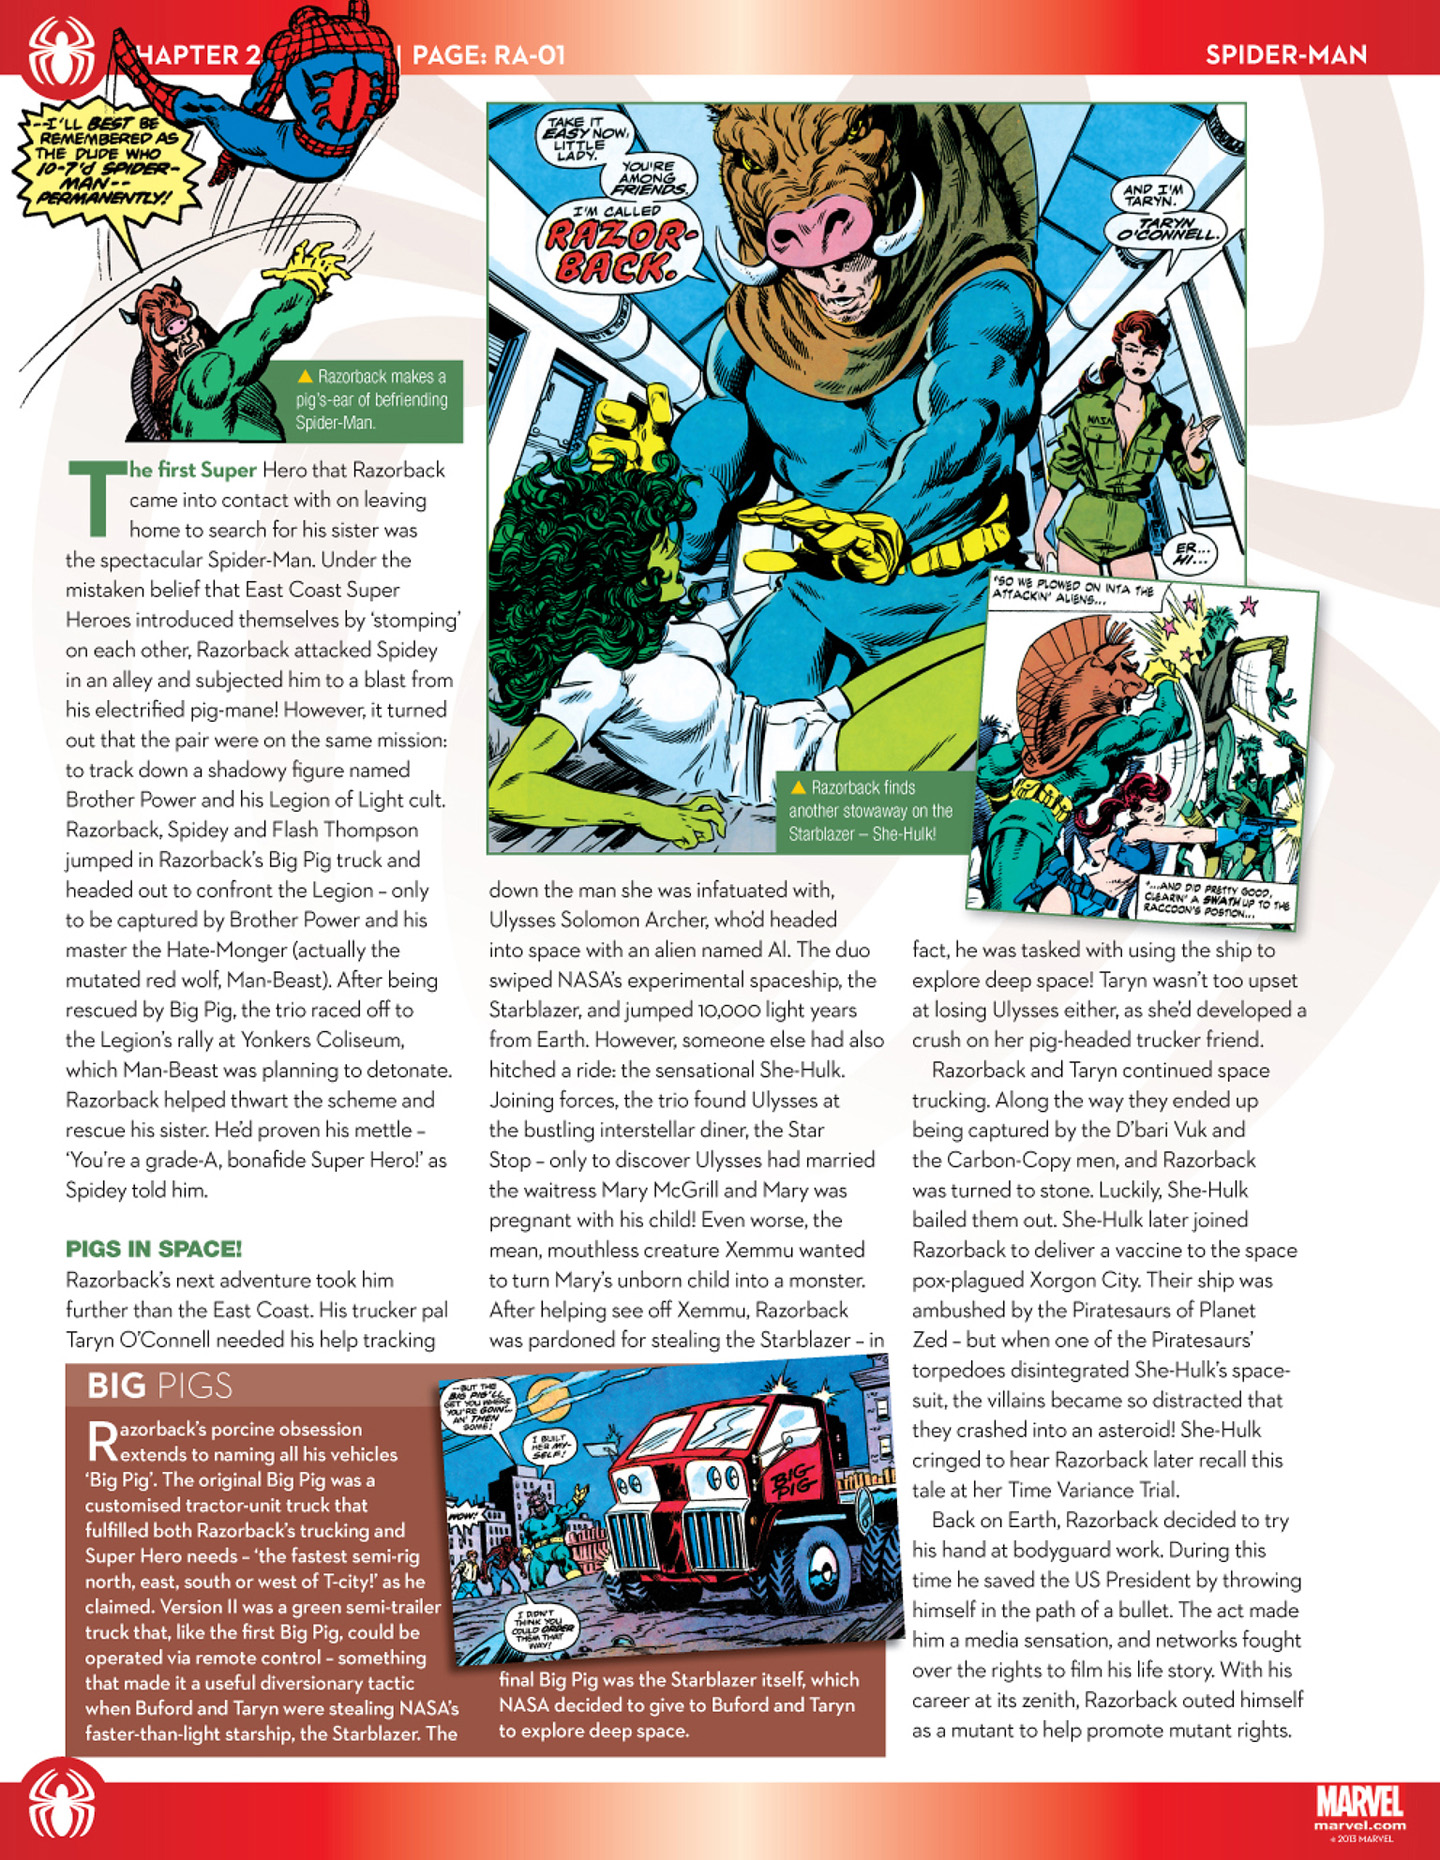 Read online Marvel Fact Files comic -  Issue #42 - 24